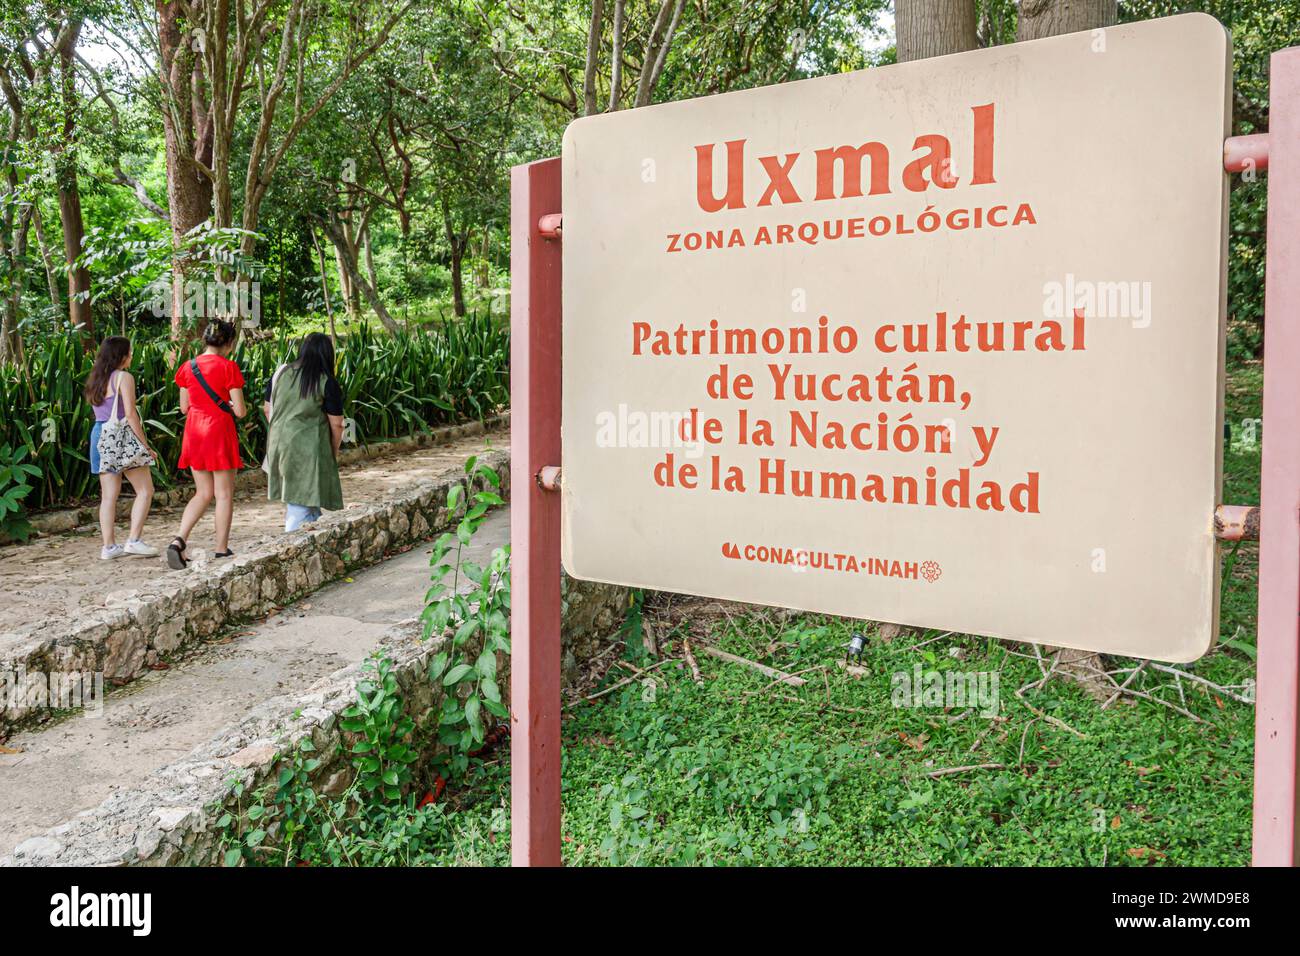 Merida Mexico,Puuc style Uxmal Archaeological Zone Site,Zona Arqueologica de Uxmal,classic Mayan city,entrance sign,arriving visitors woman women lady Stock Photo